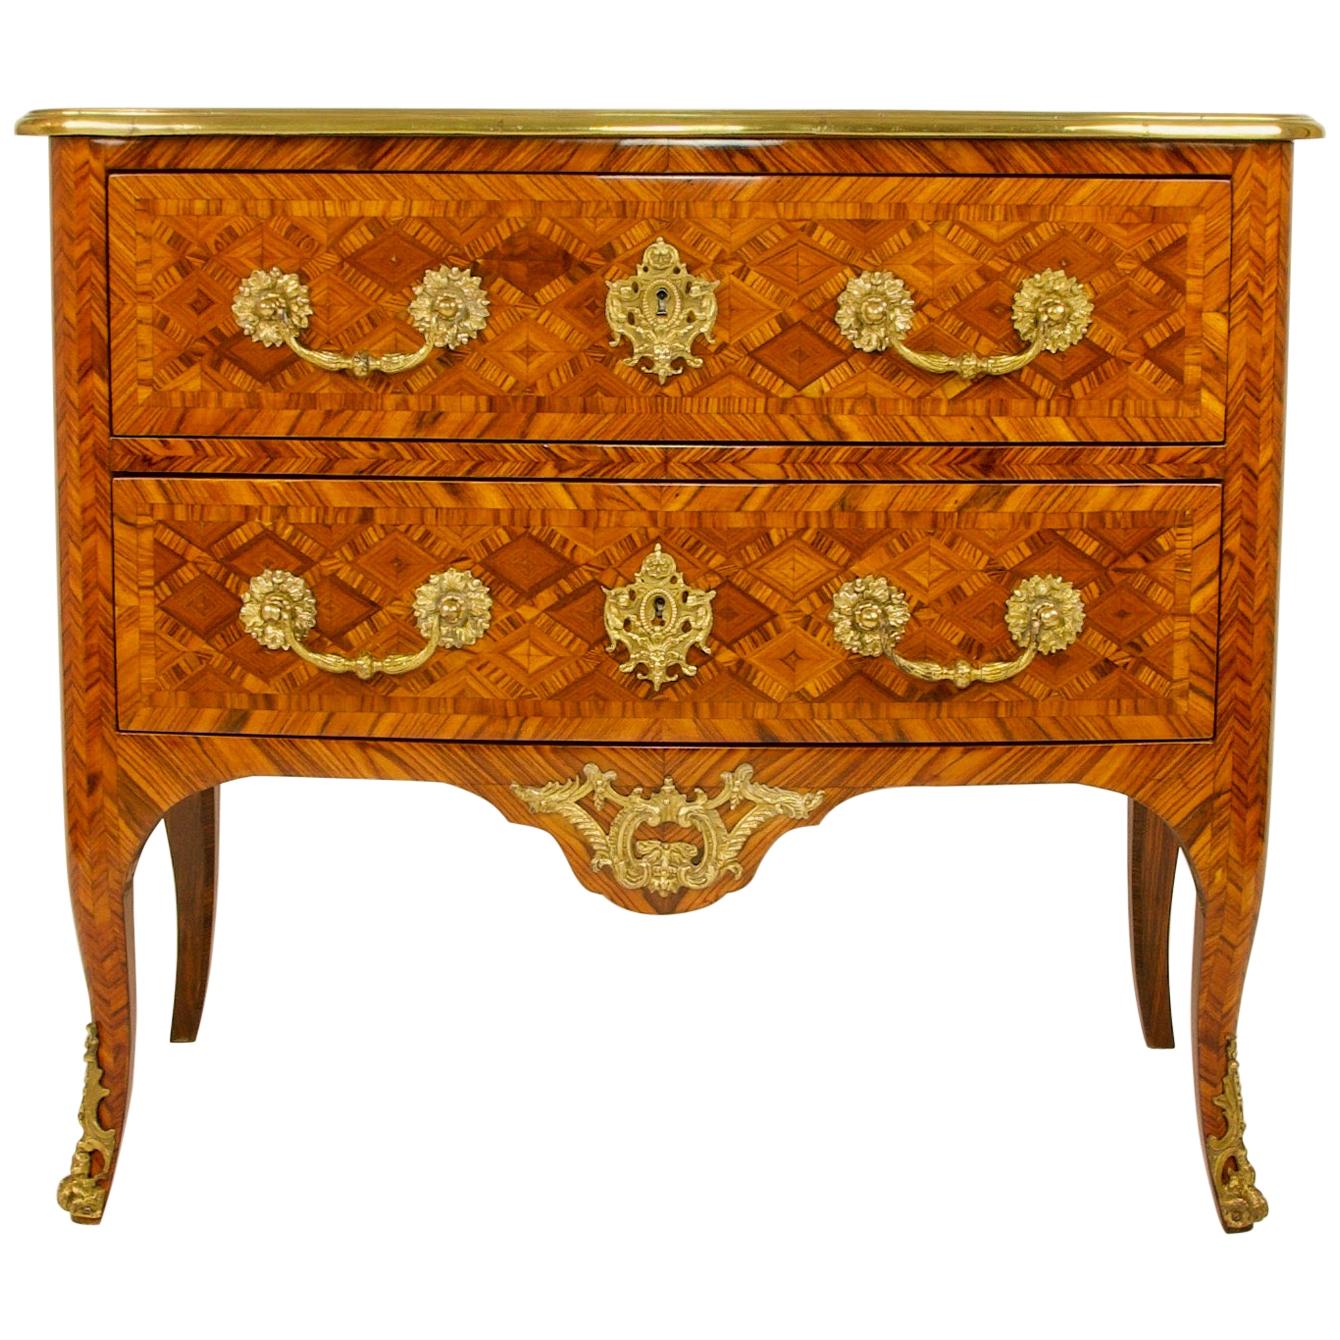 19th Century French Louis XIV Régence Trelliswork Marquetry Commode or Sauteuse For Sale